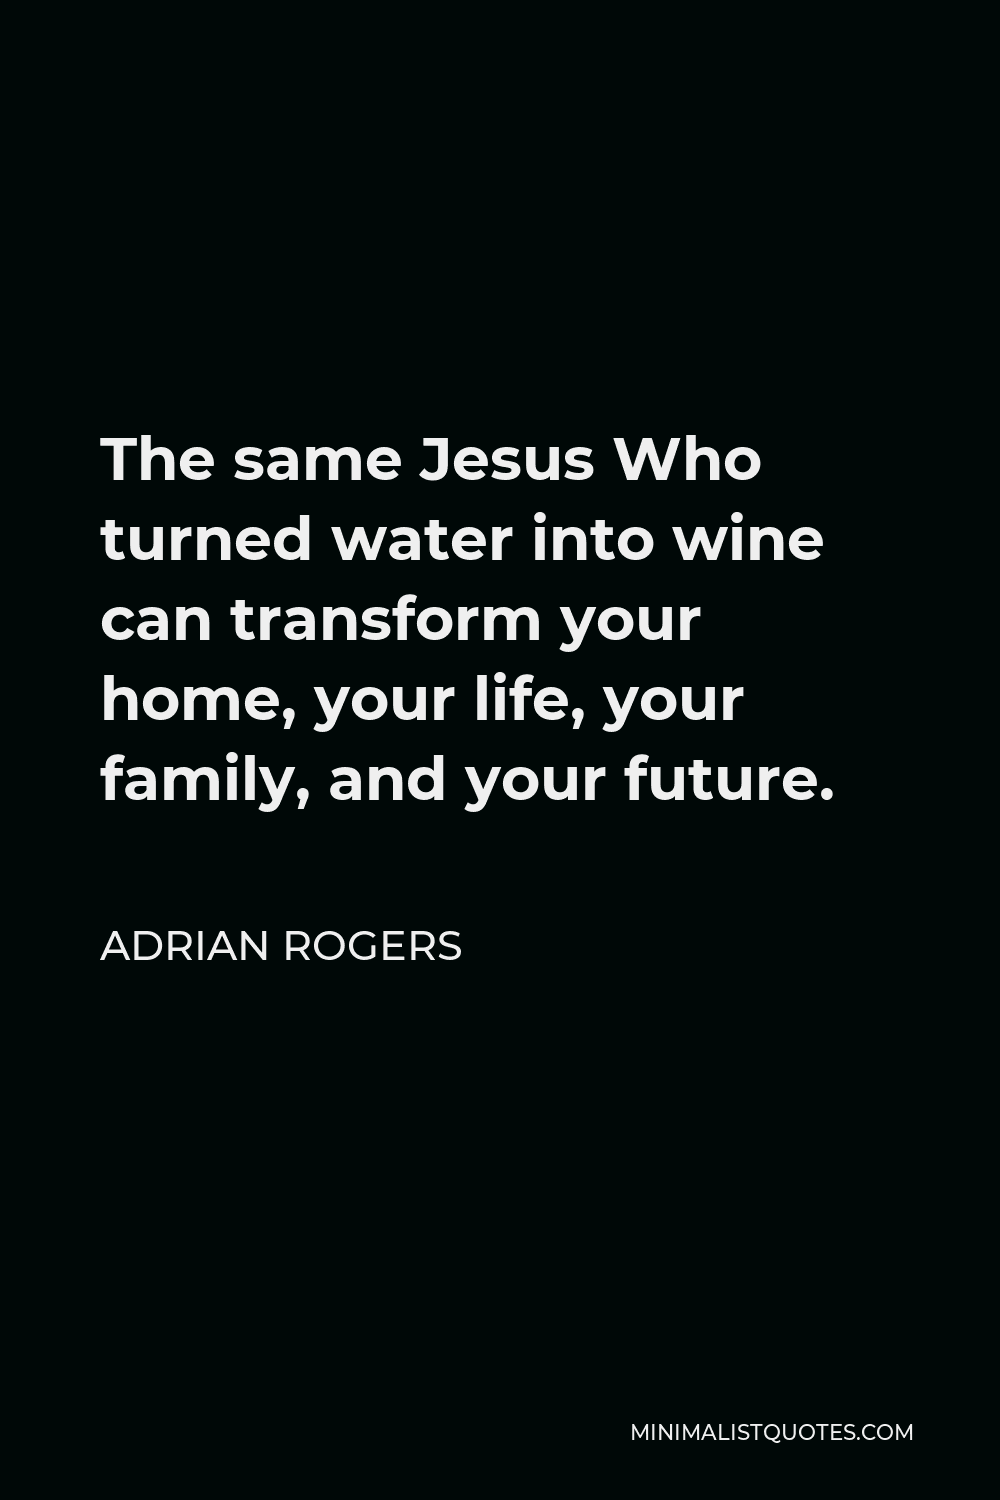 Adrian Rogers Quote - The same Jesus Who turned water into wine can transform your home, your life, your family, and your future.